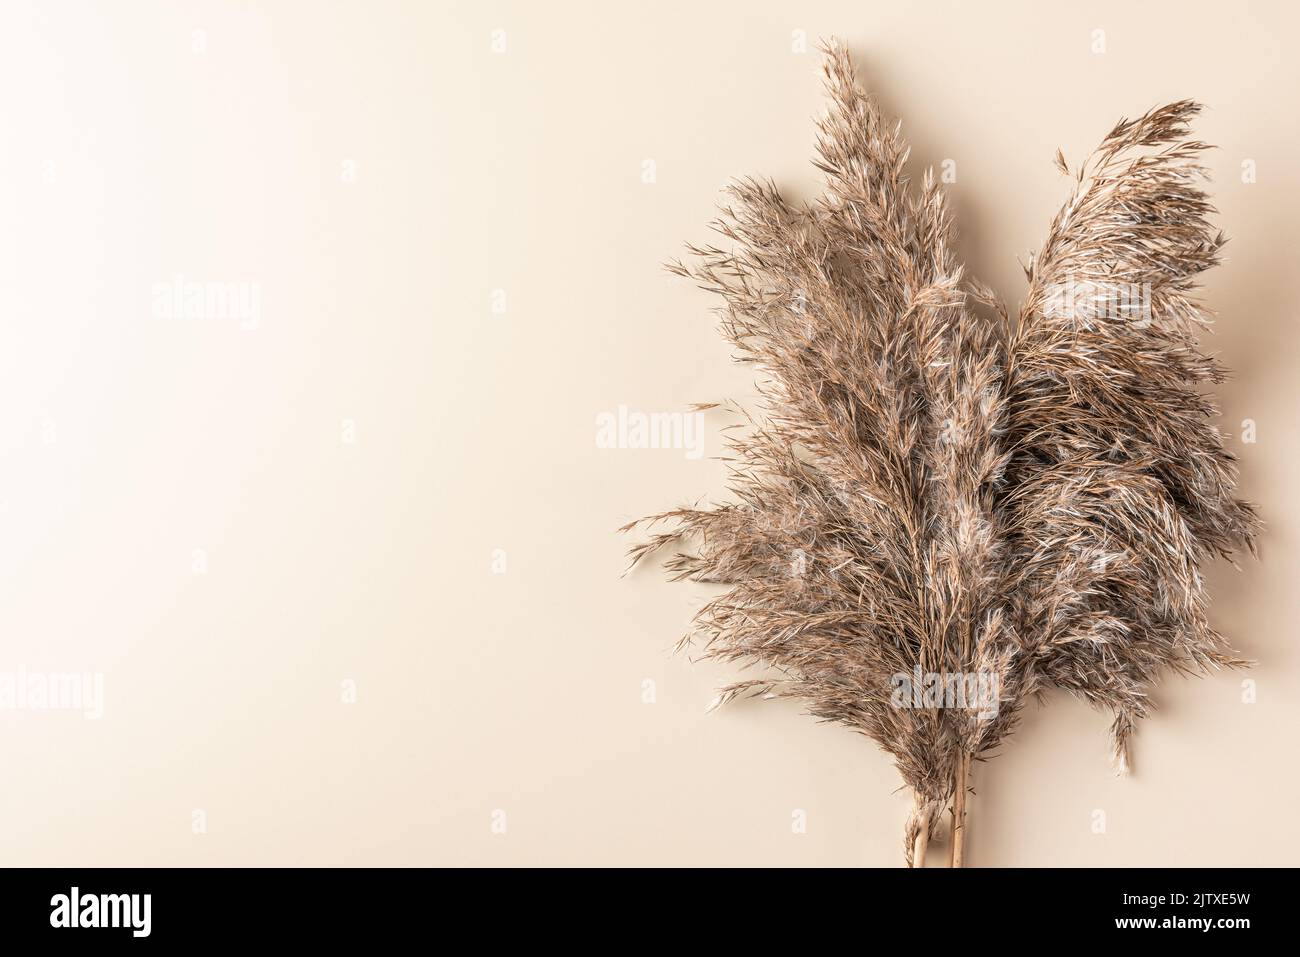 Autumn background. Dry cane reeds or pampas grass on beige background. Minimal, stylish, monochrome concept. Flat lay. Top view with copy space Stock Photo